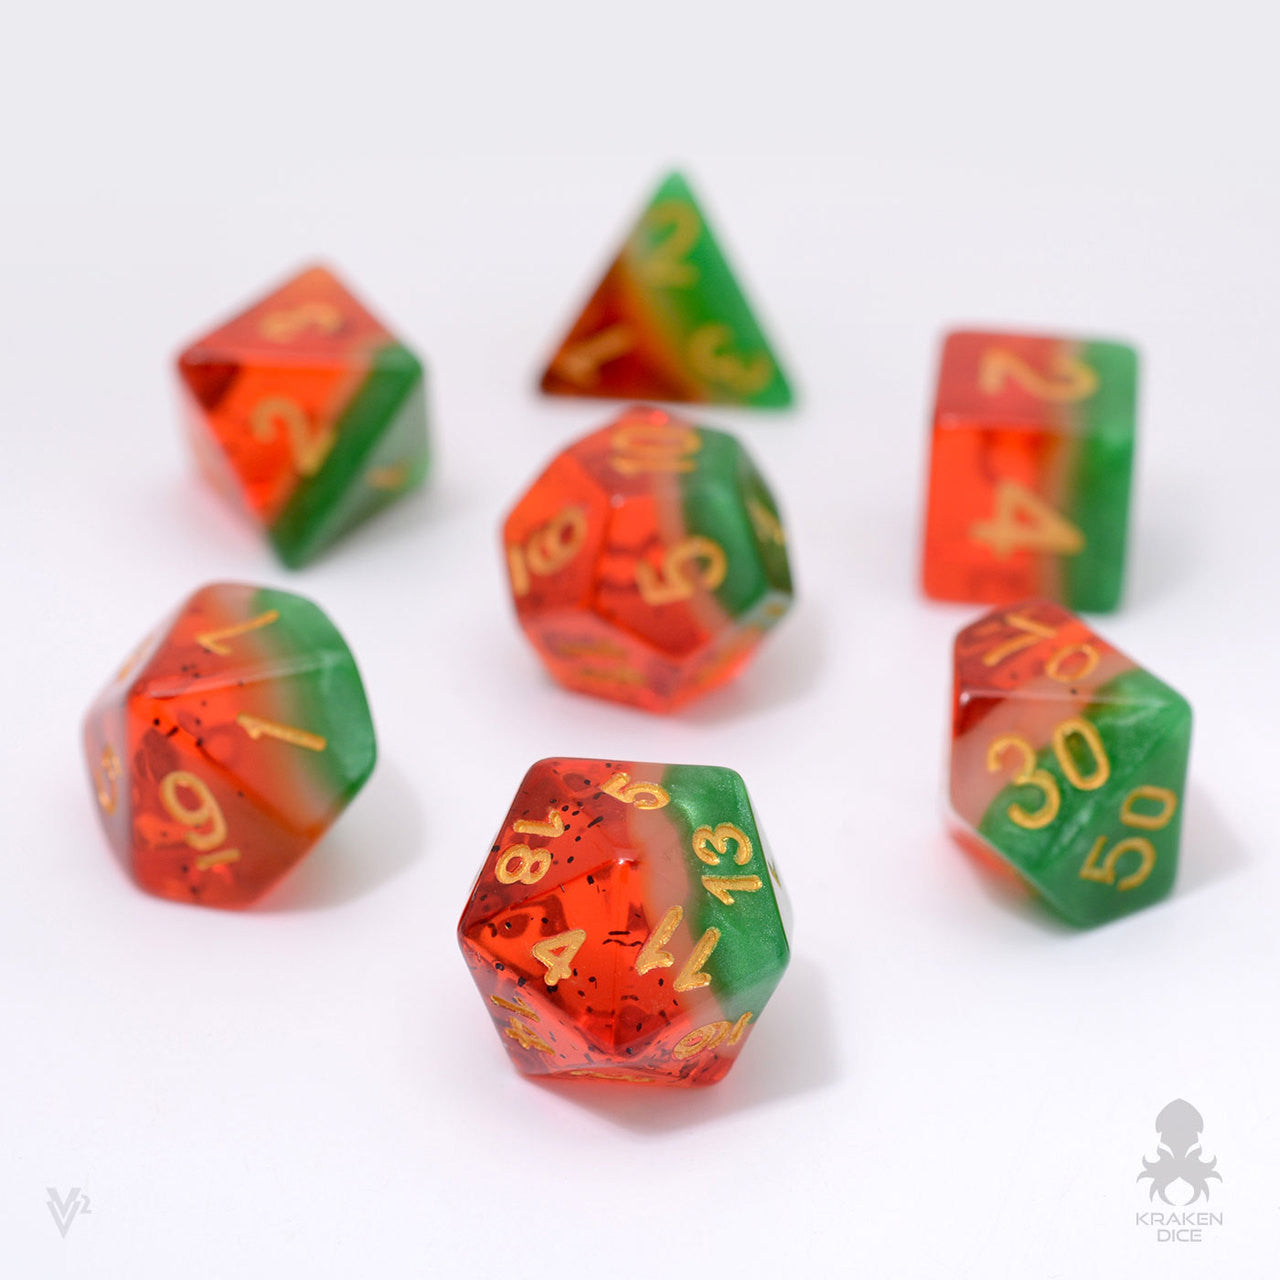 Watermelon 7pc Dice Set Inked in Gold